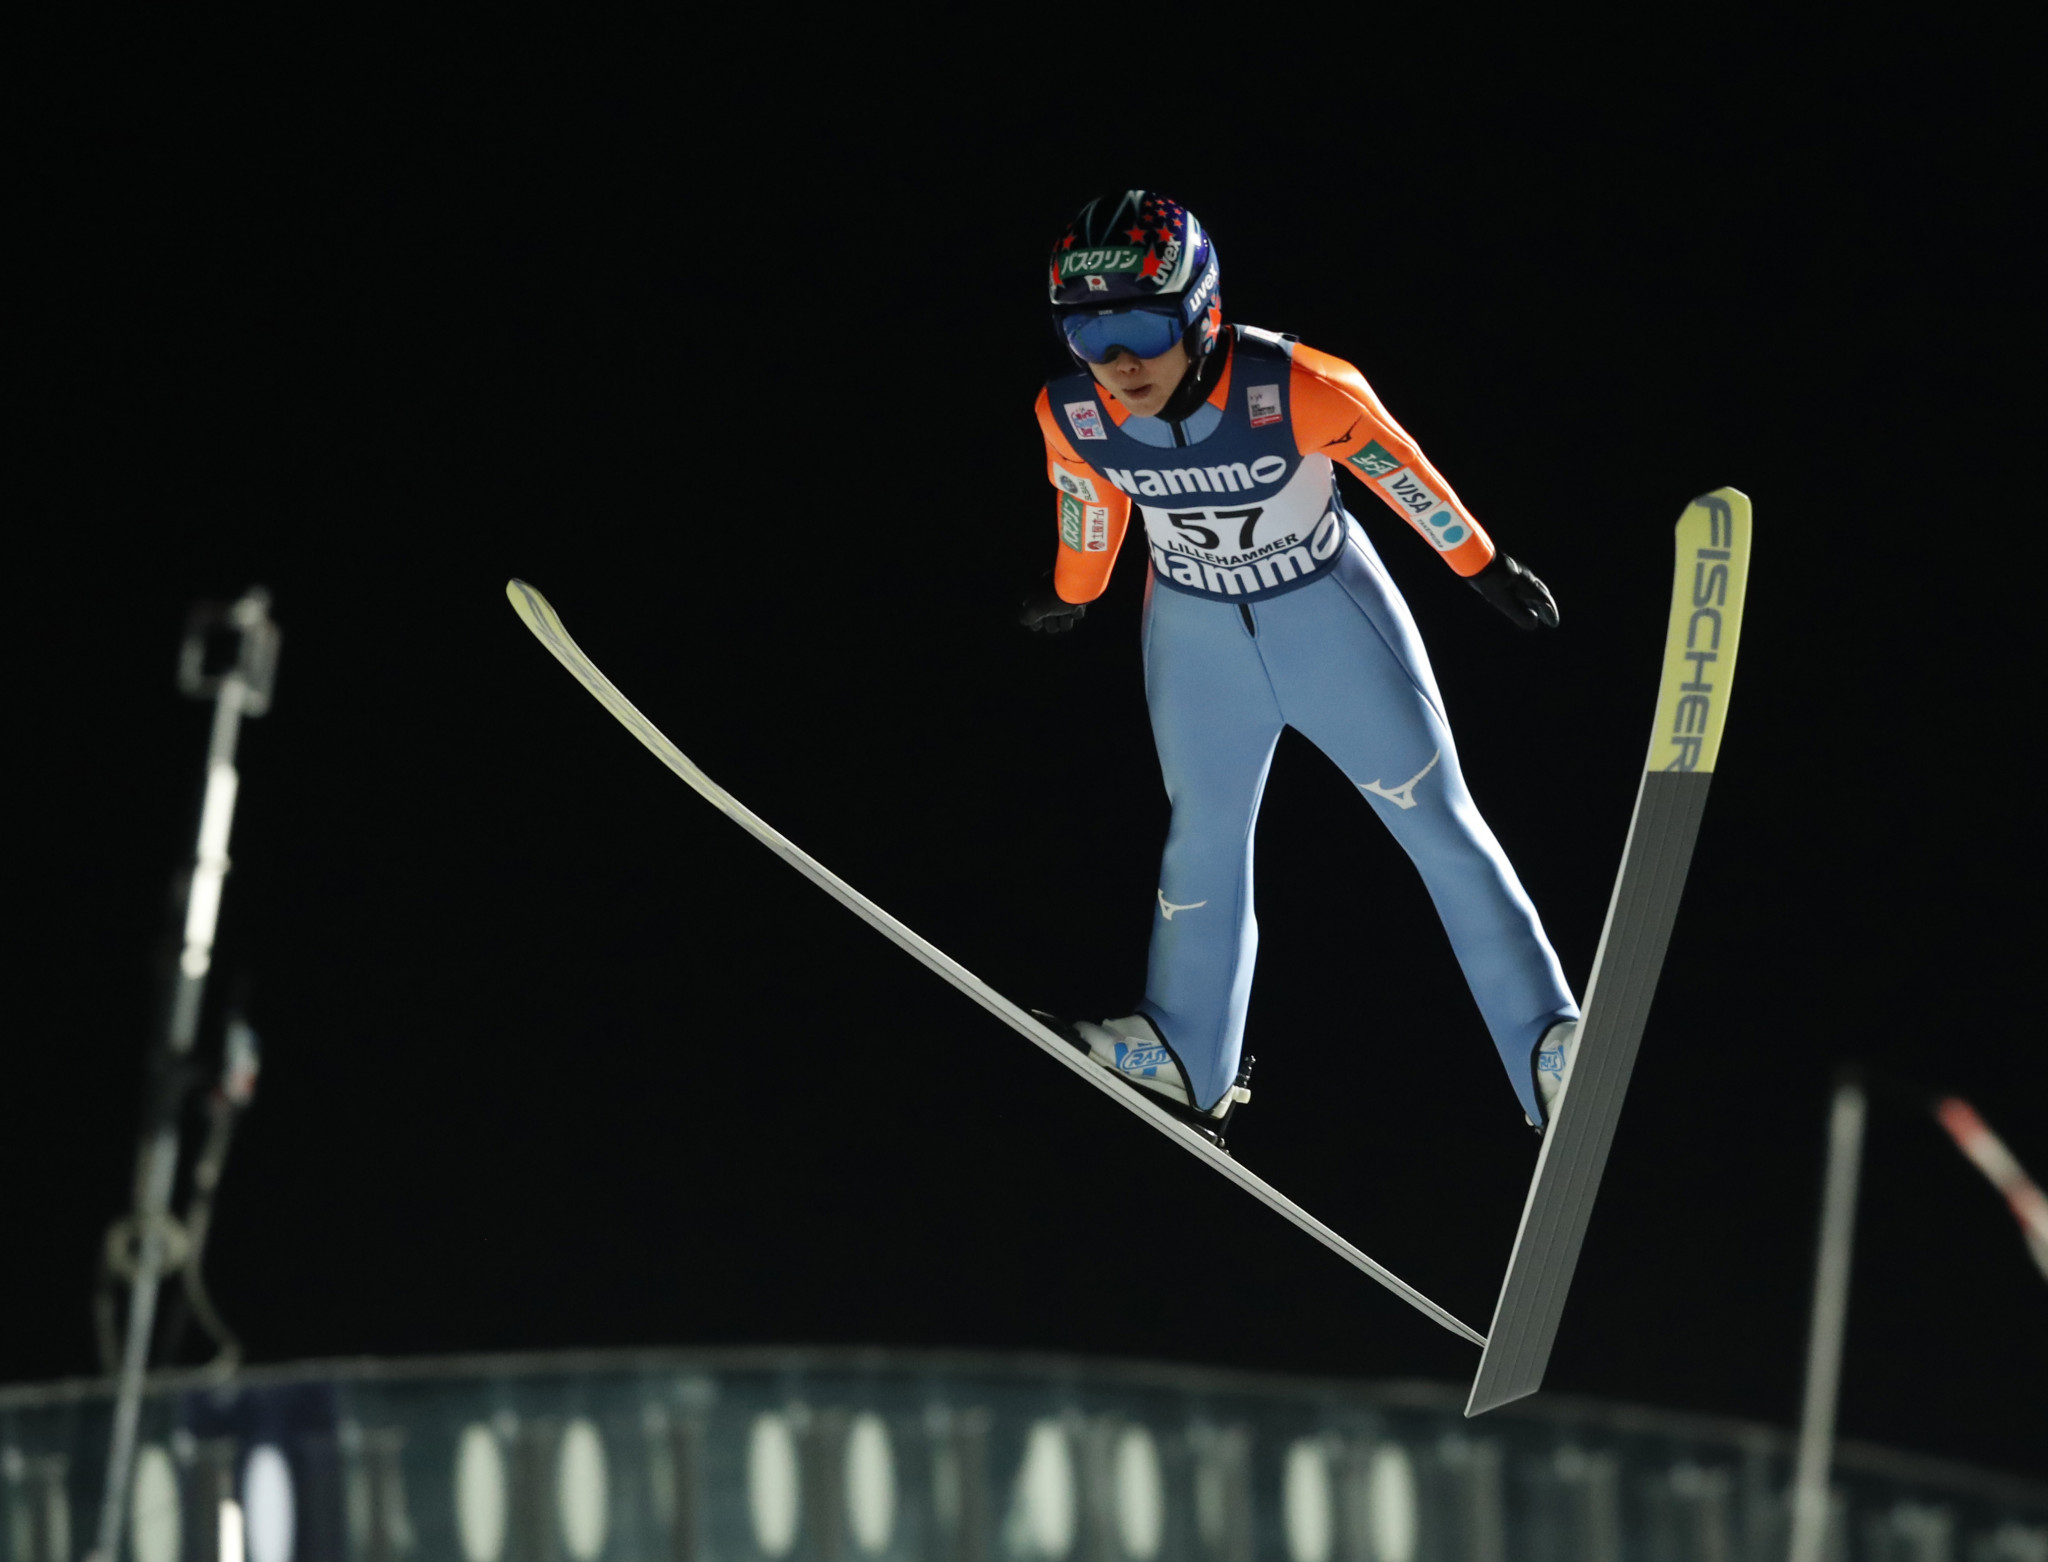 Japan make history by winning inaugural women's team event at Ski Jumping World Cup